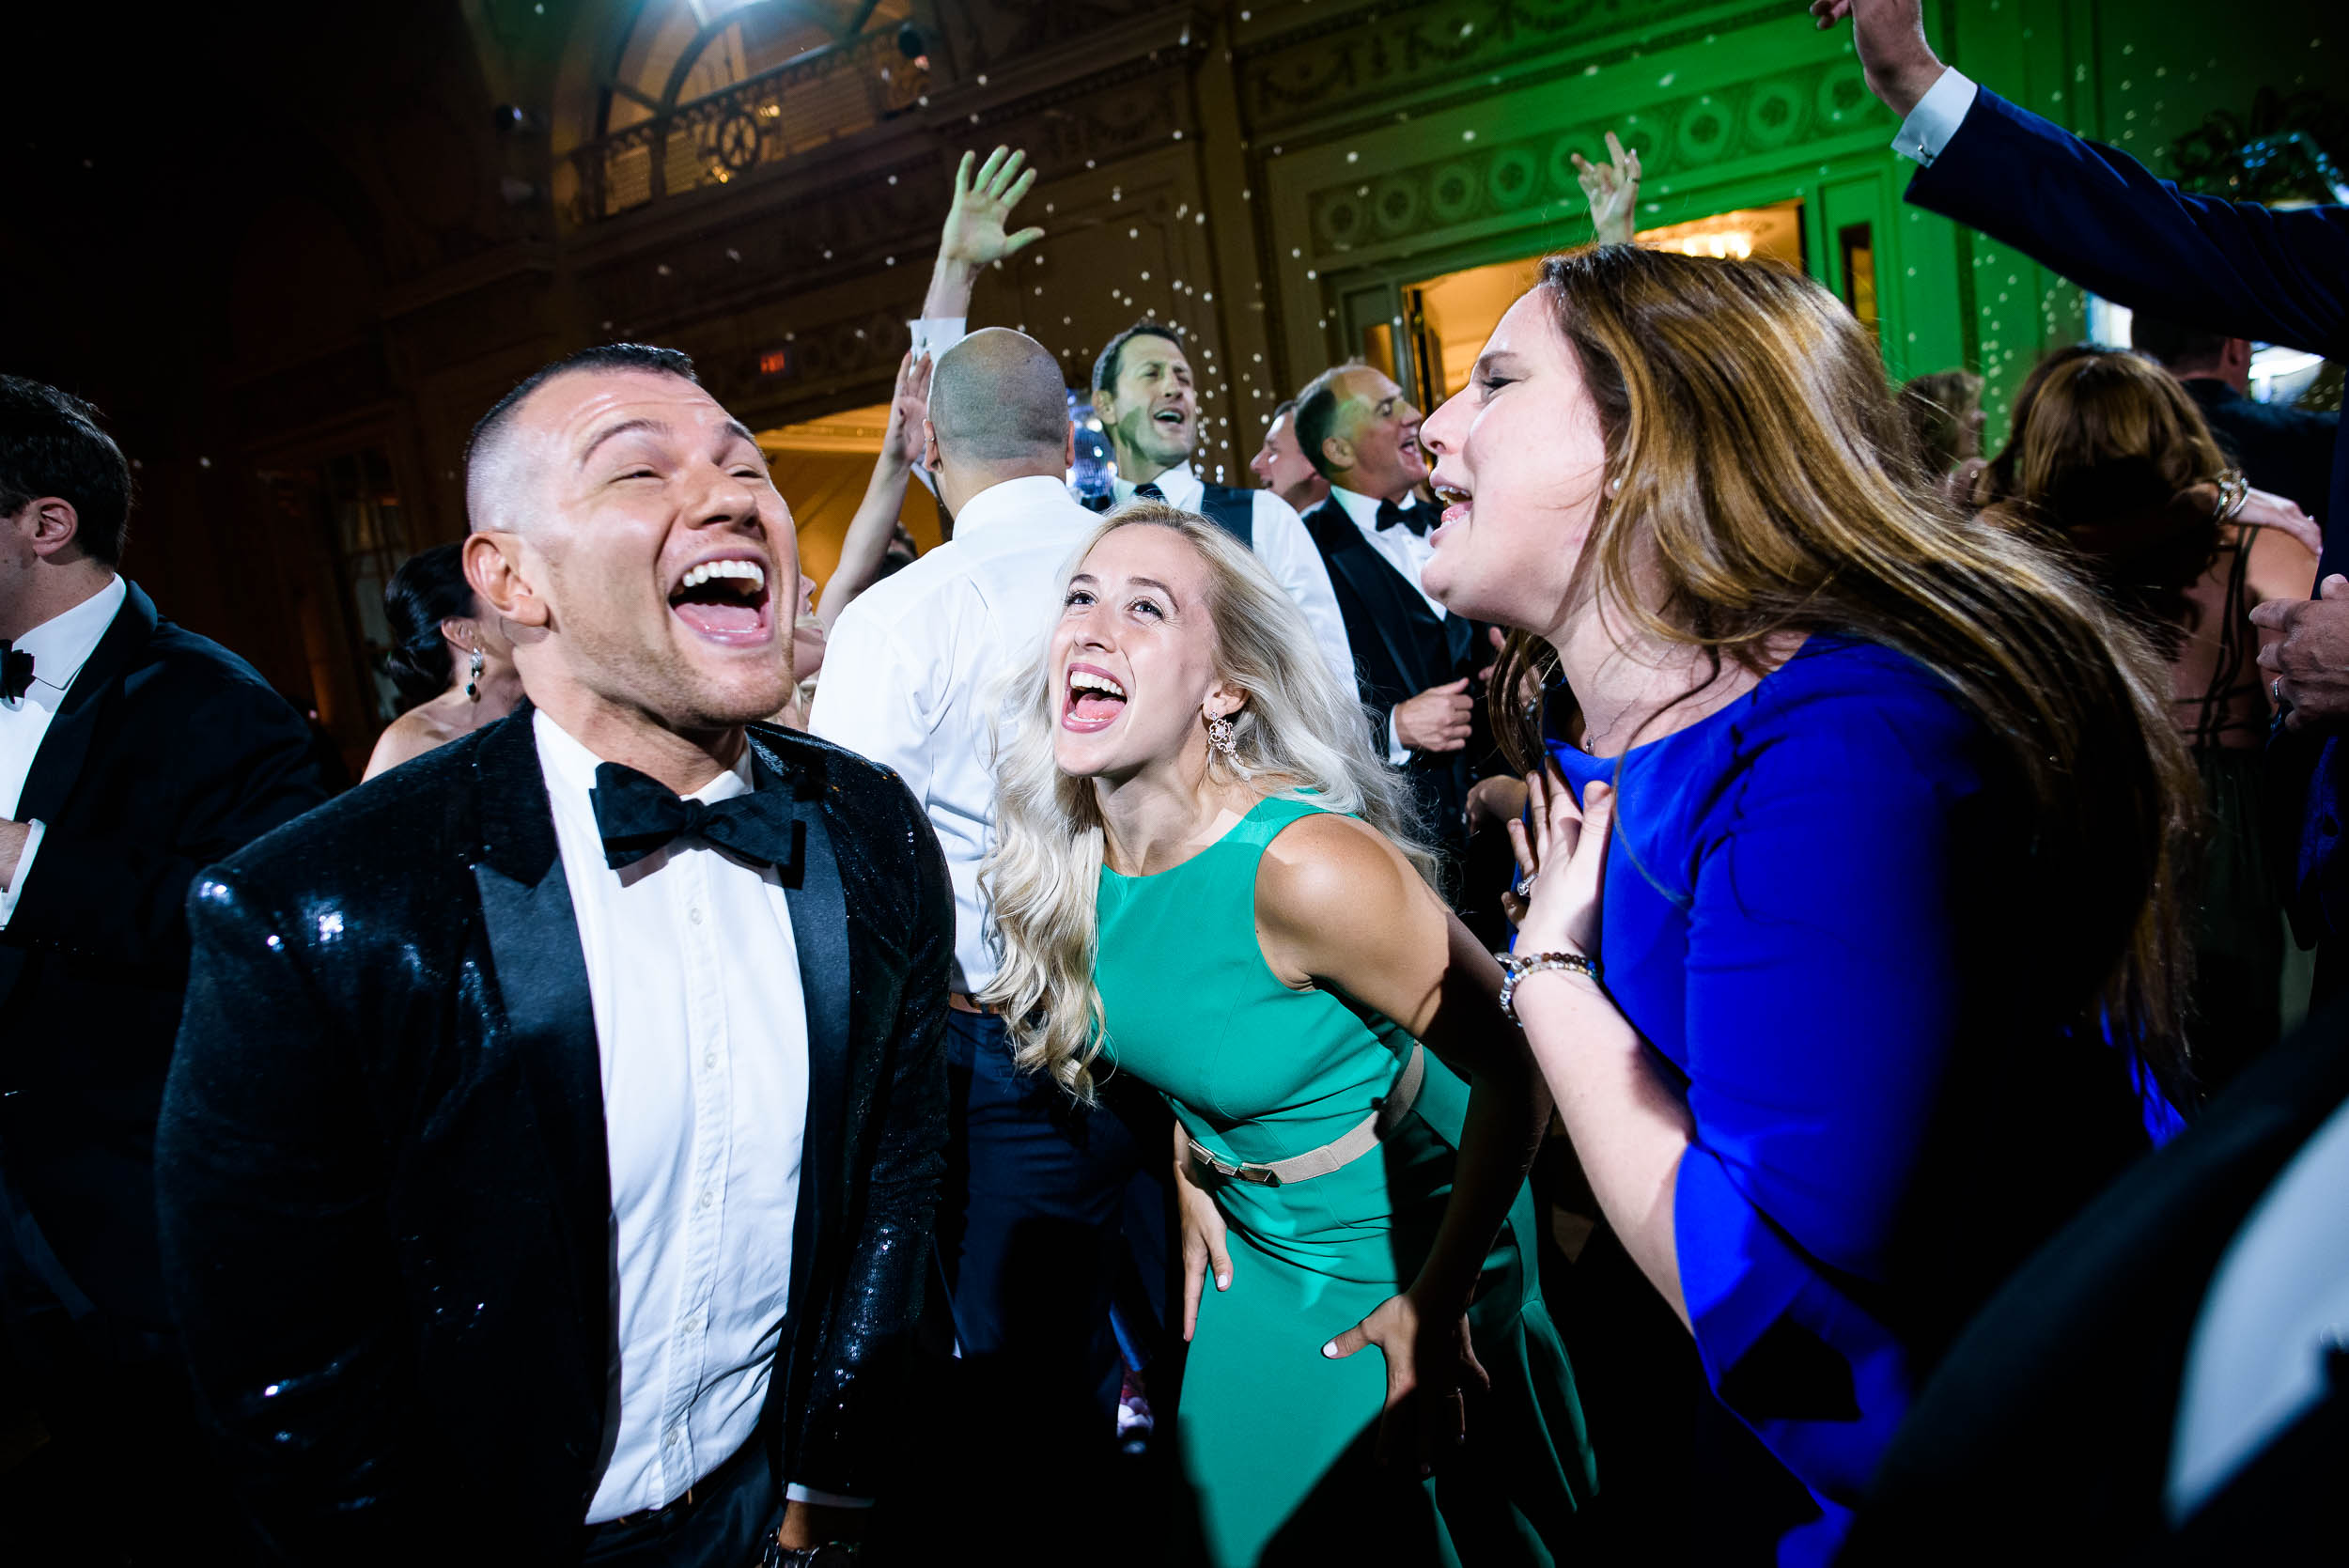 Fun wedding dancing photos for luxurious fall wedding at the Chicago Symphony Center captured by J. Brown Photography. See more wedding ideas at jbrownphotography.com!